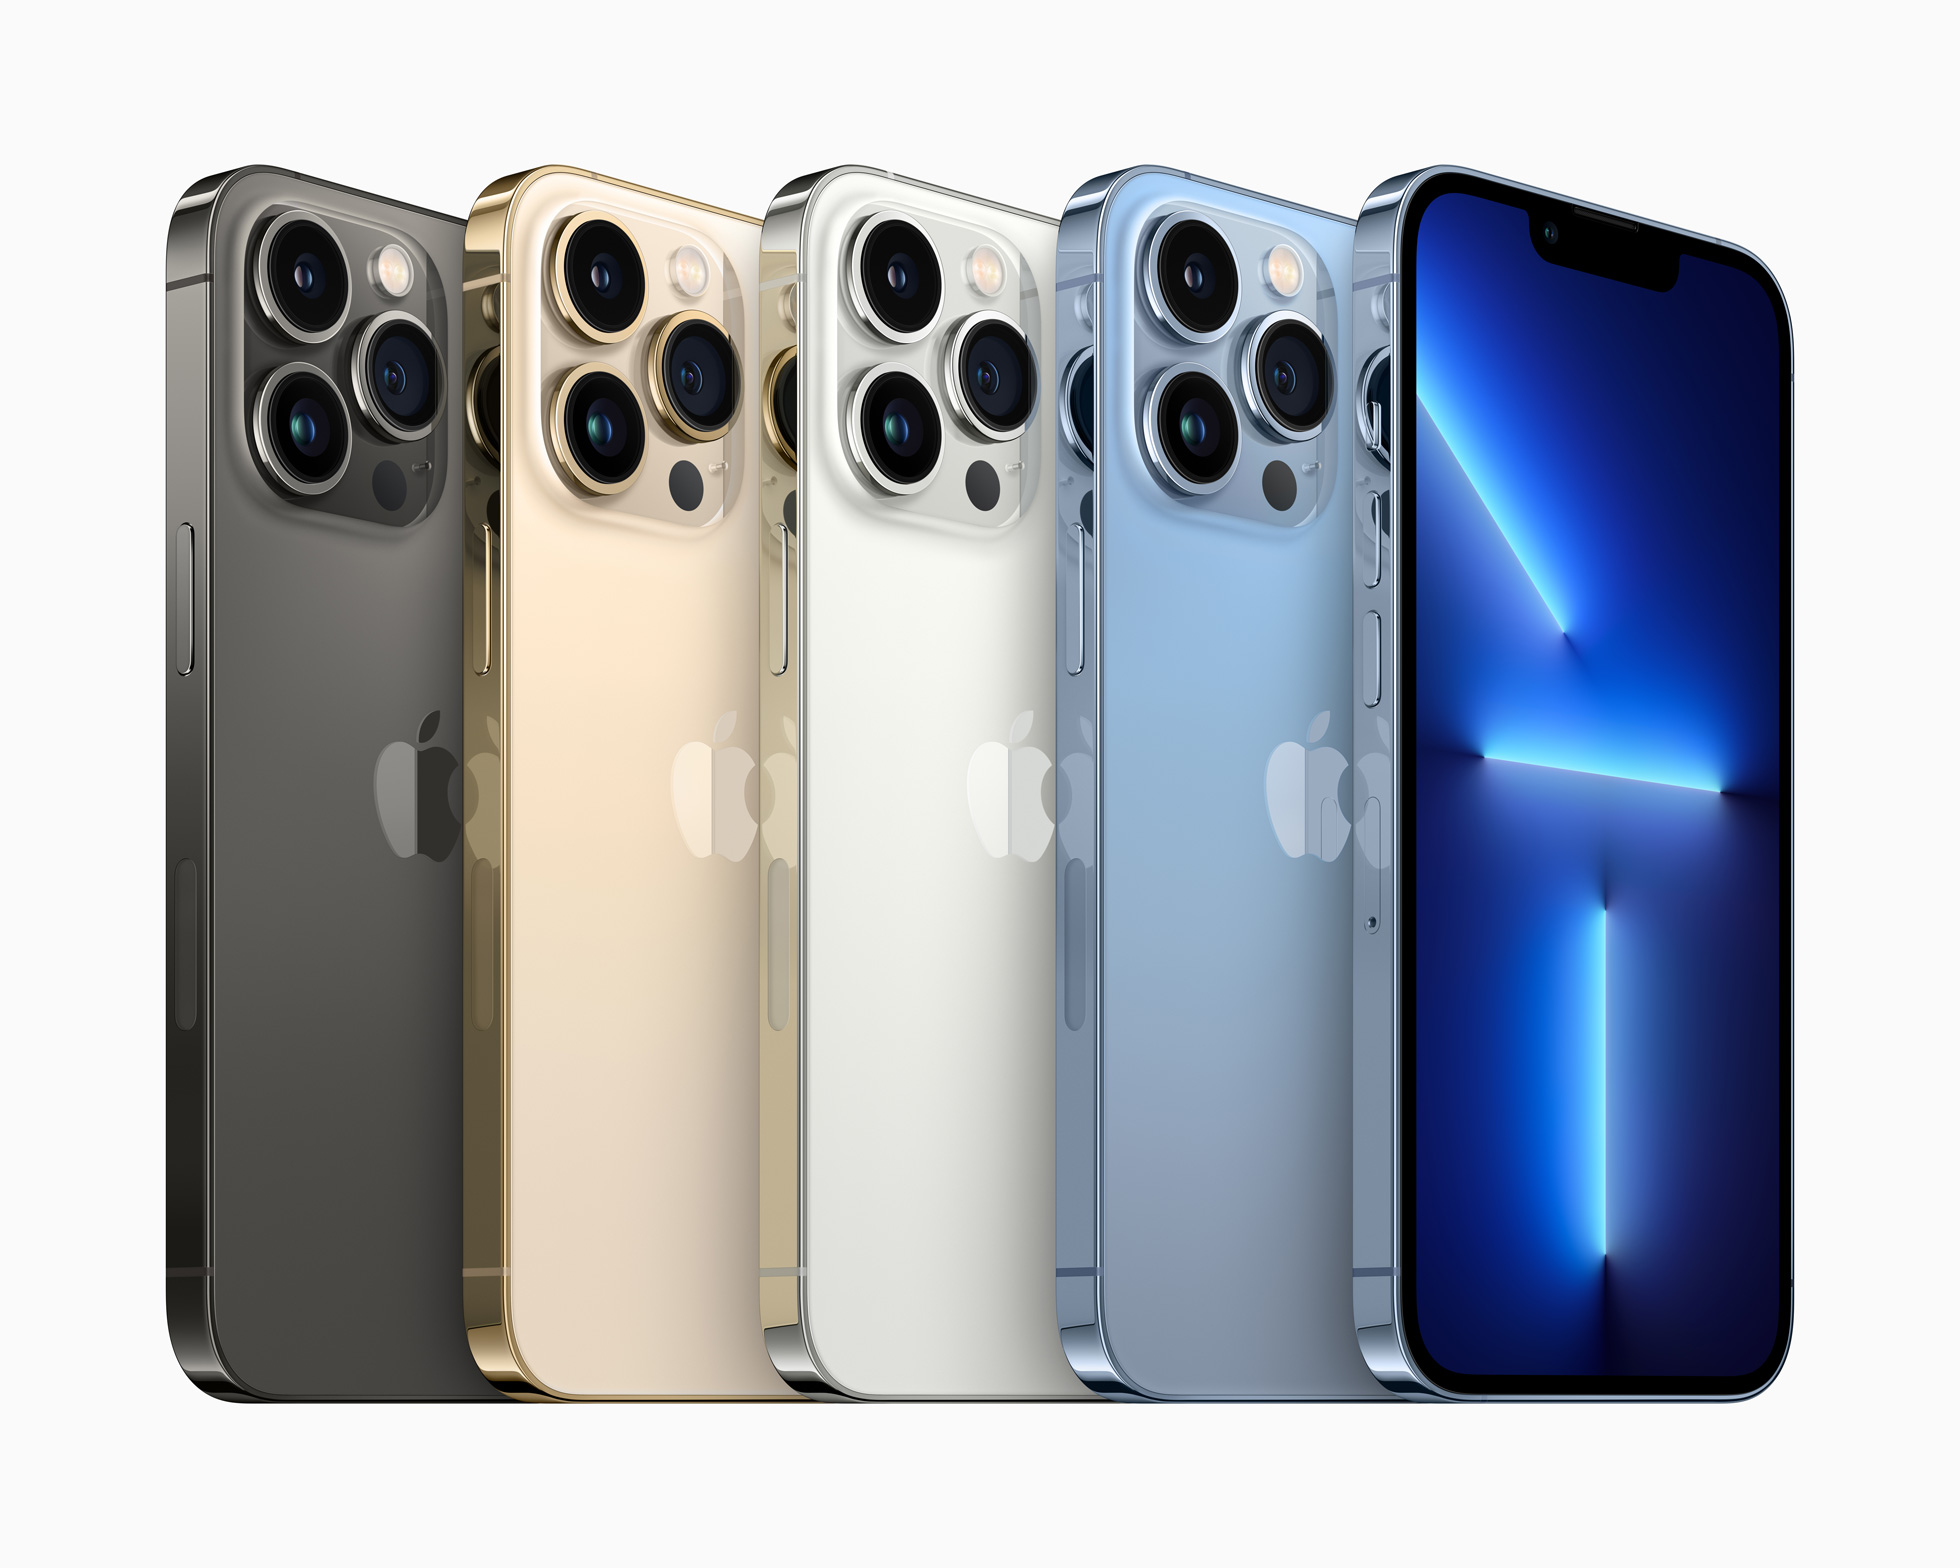 iPhone 13 Pro and iPhone 13 Pro Max colors